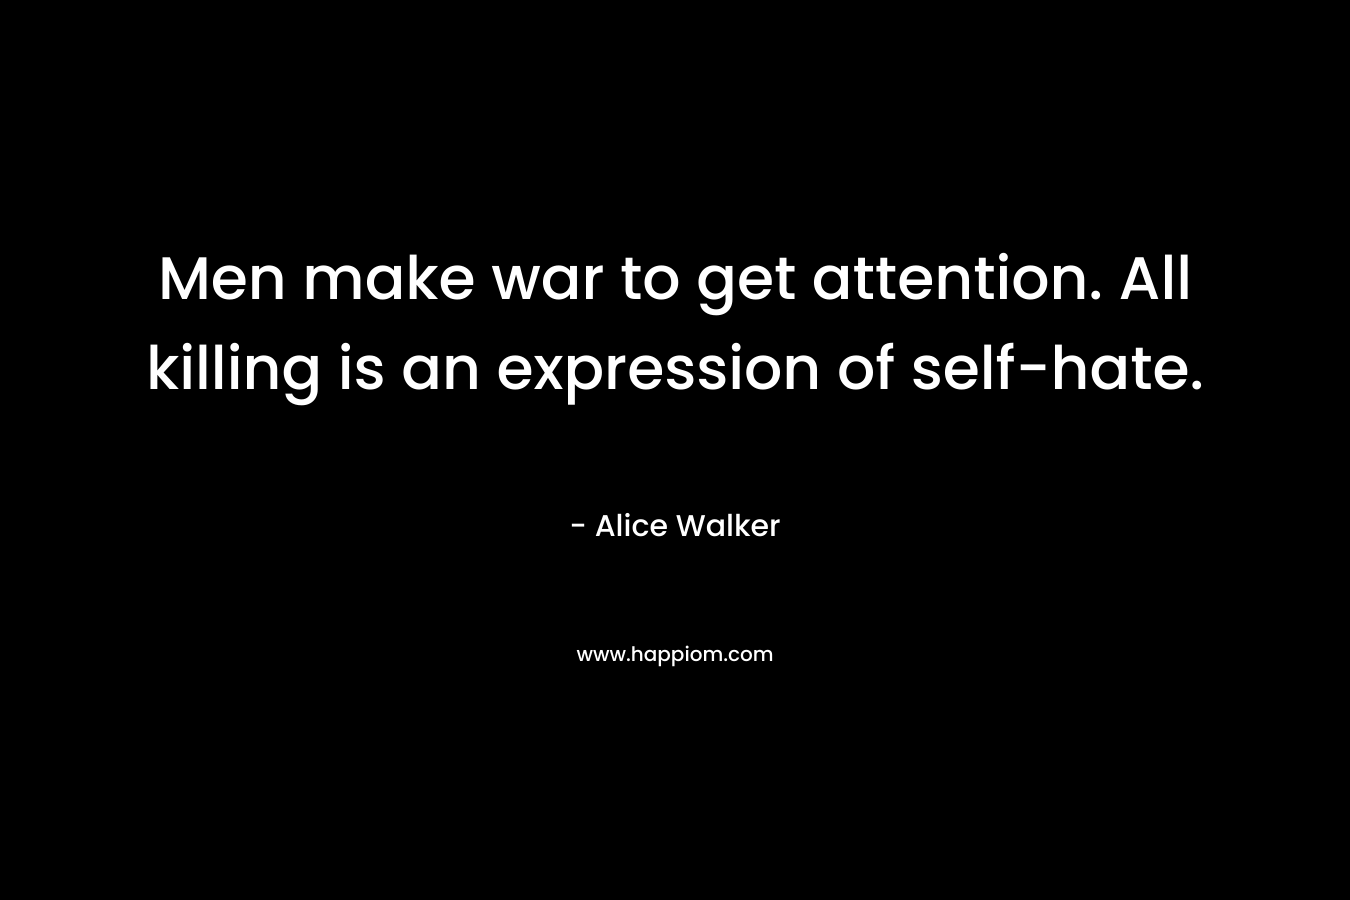 Men make war to get attention. All killing is an expression of self-hate.